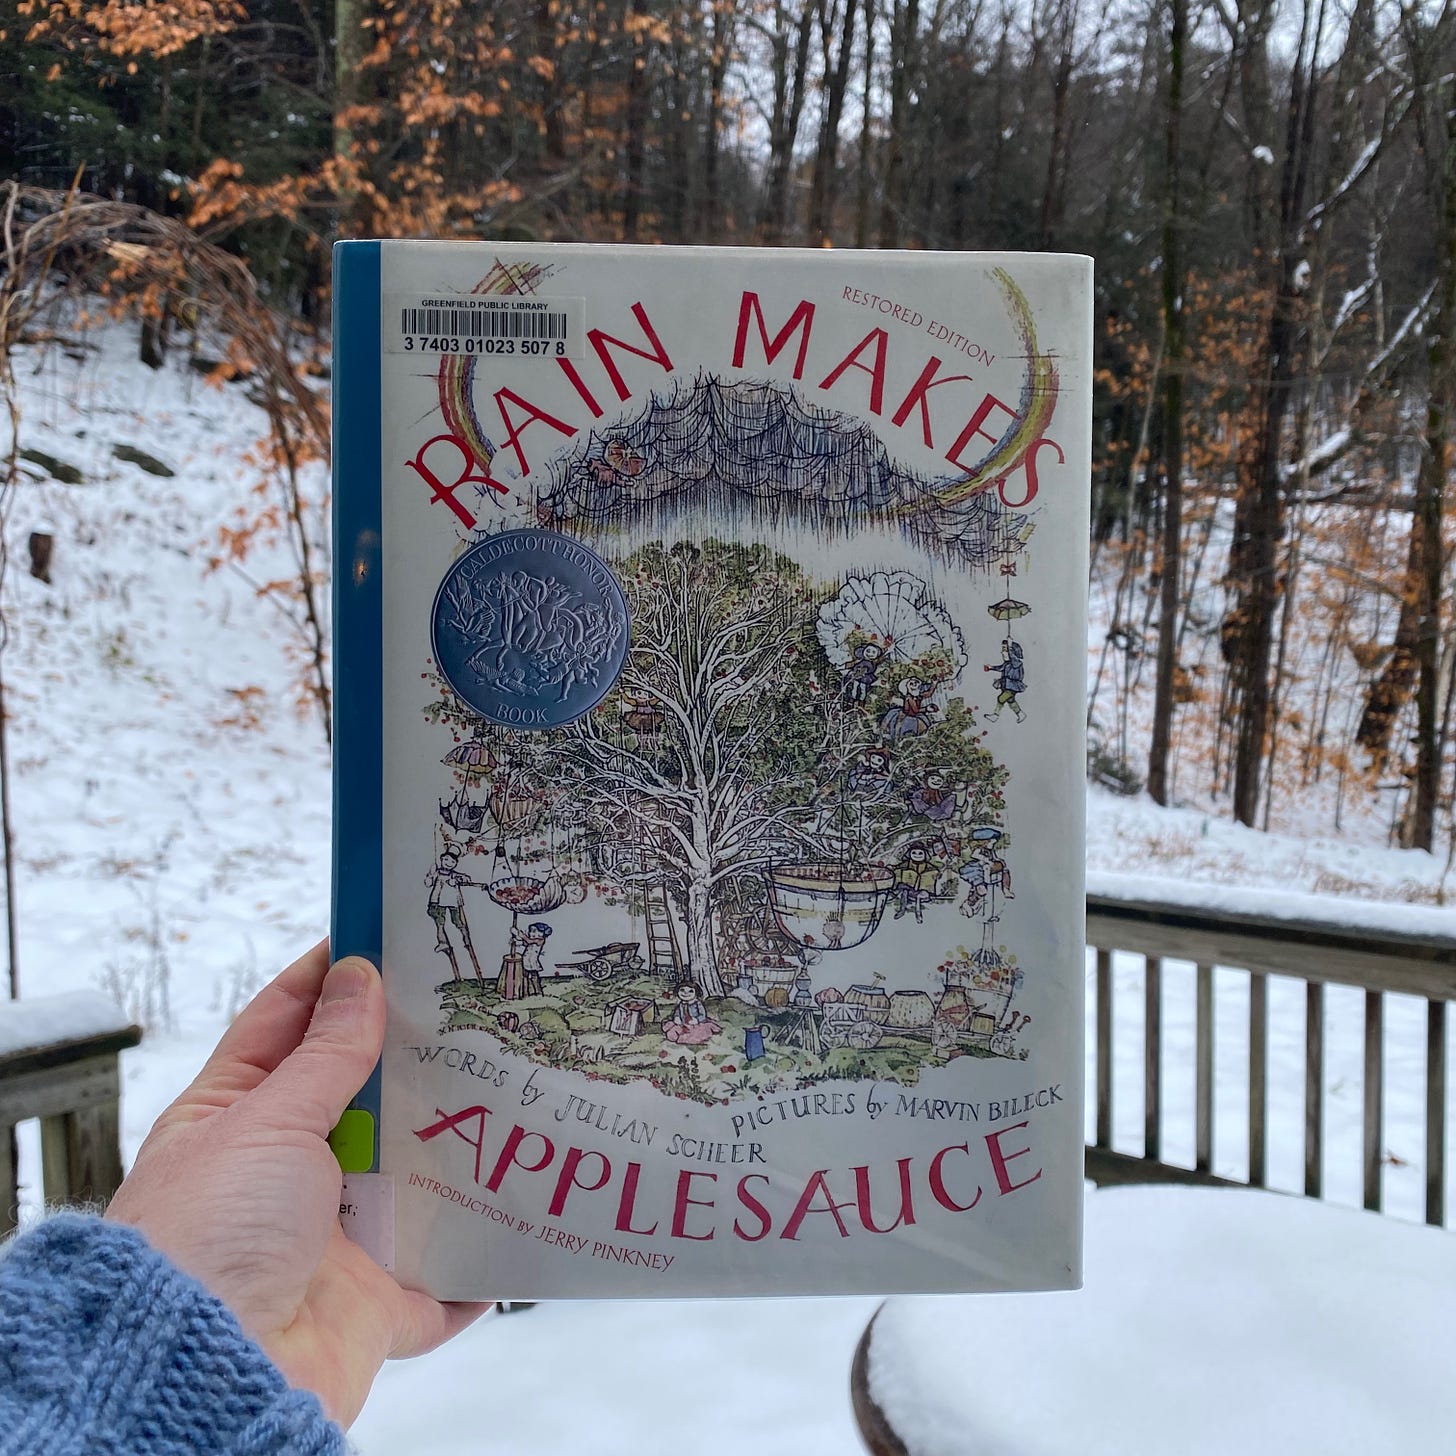 I’m holding this book up in front of my snow-covered porch.